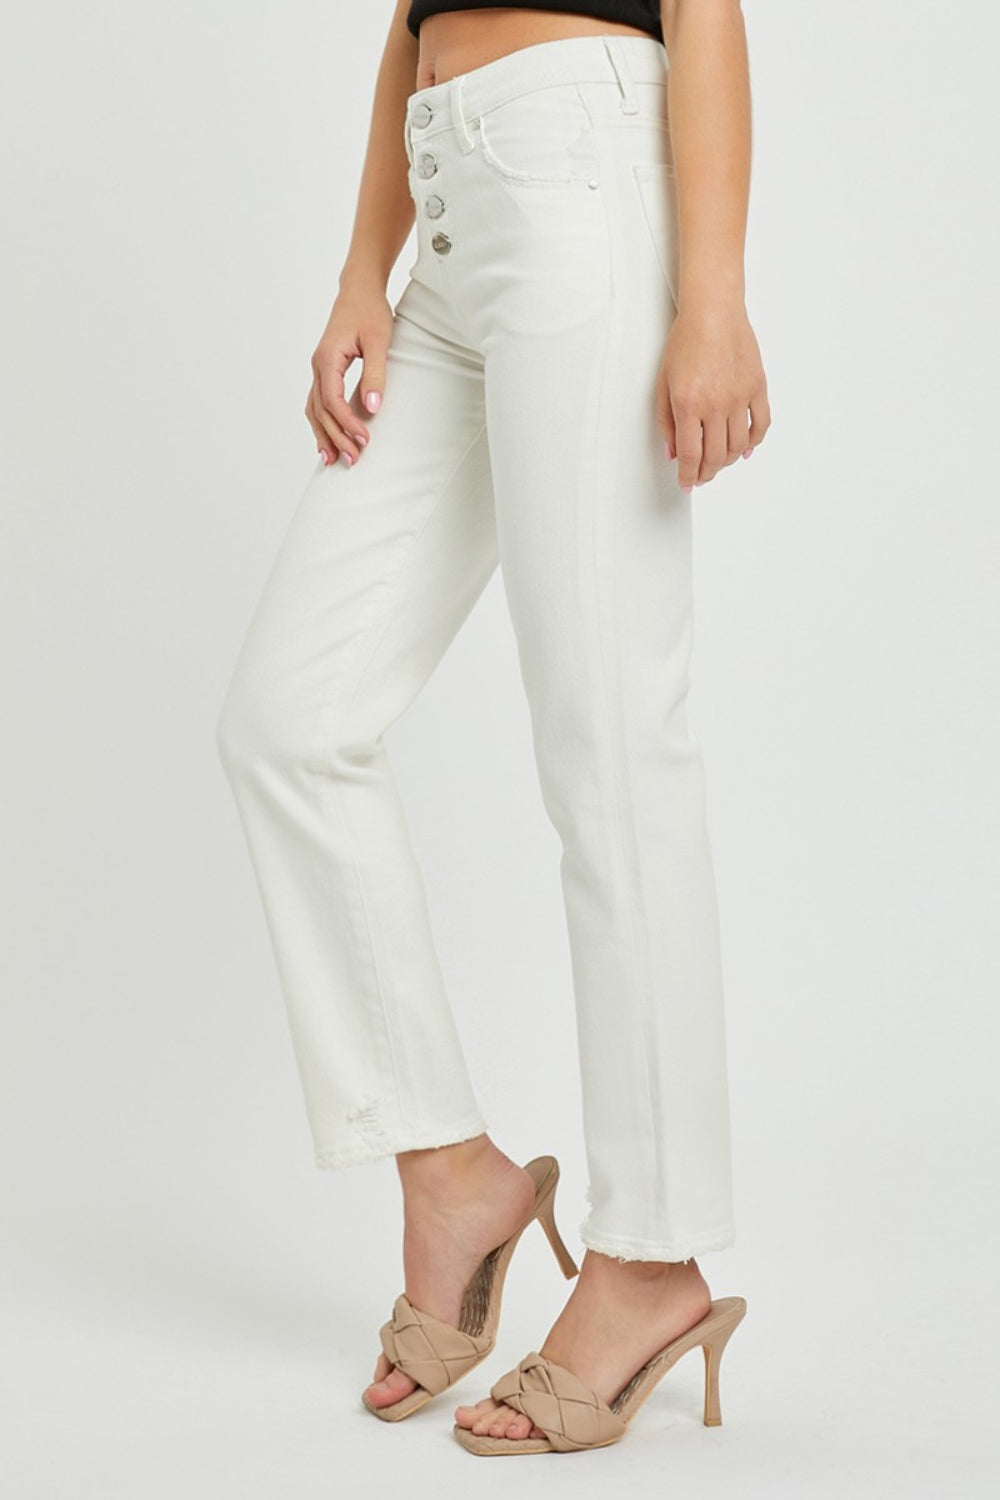 Mid-Rise Tummy Control Straight Jeans are a wardrobe essential for any fashion-savvy individual. With a mid-rise waist and tummy control feature, these jeans provide a flattering and comfortable fit. The straight leg silhouette offers a timeless look that can be dressed up or down for any occasion. 